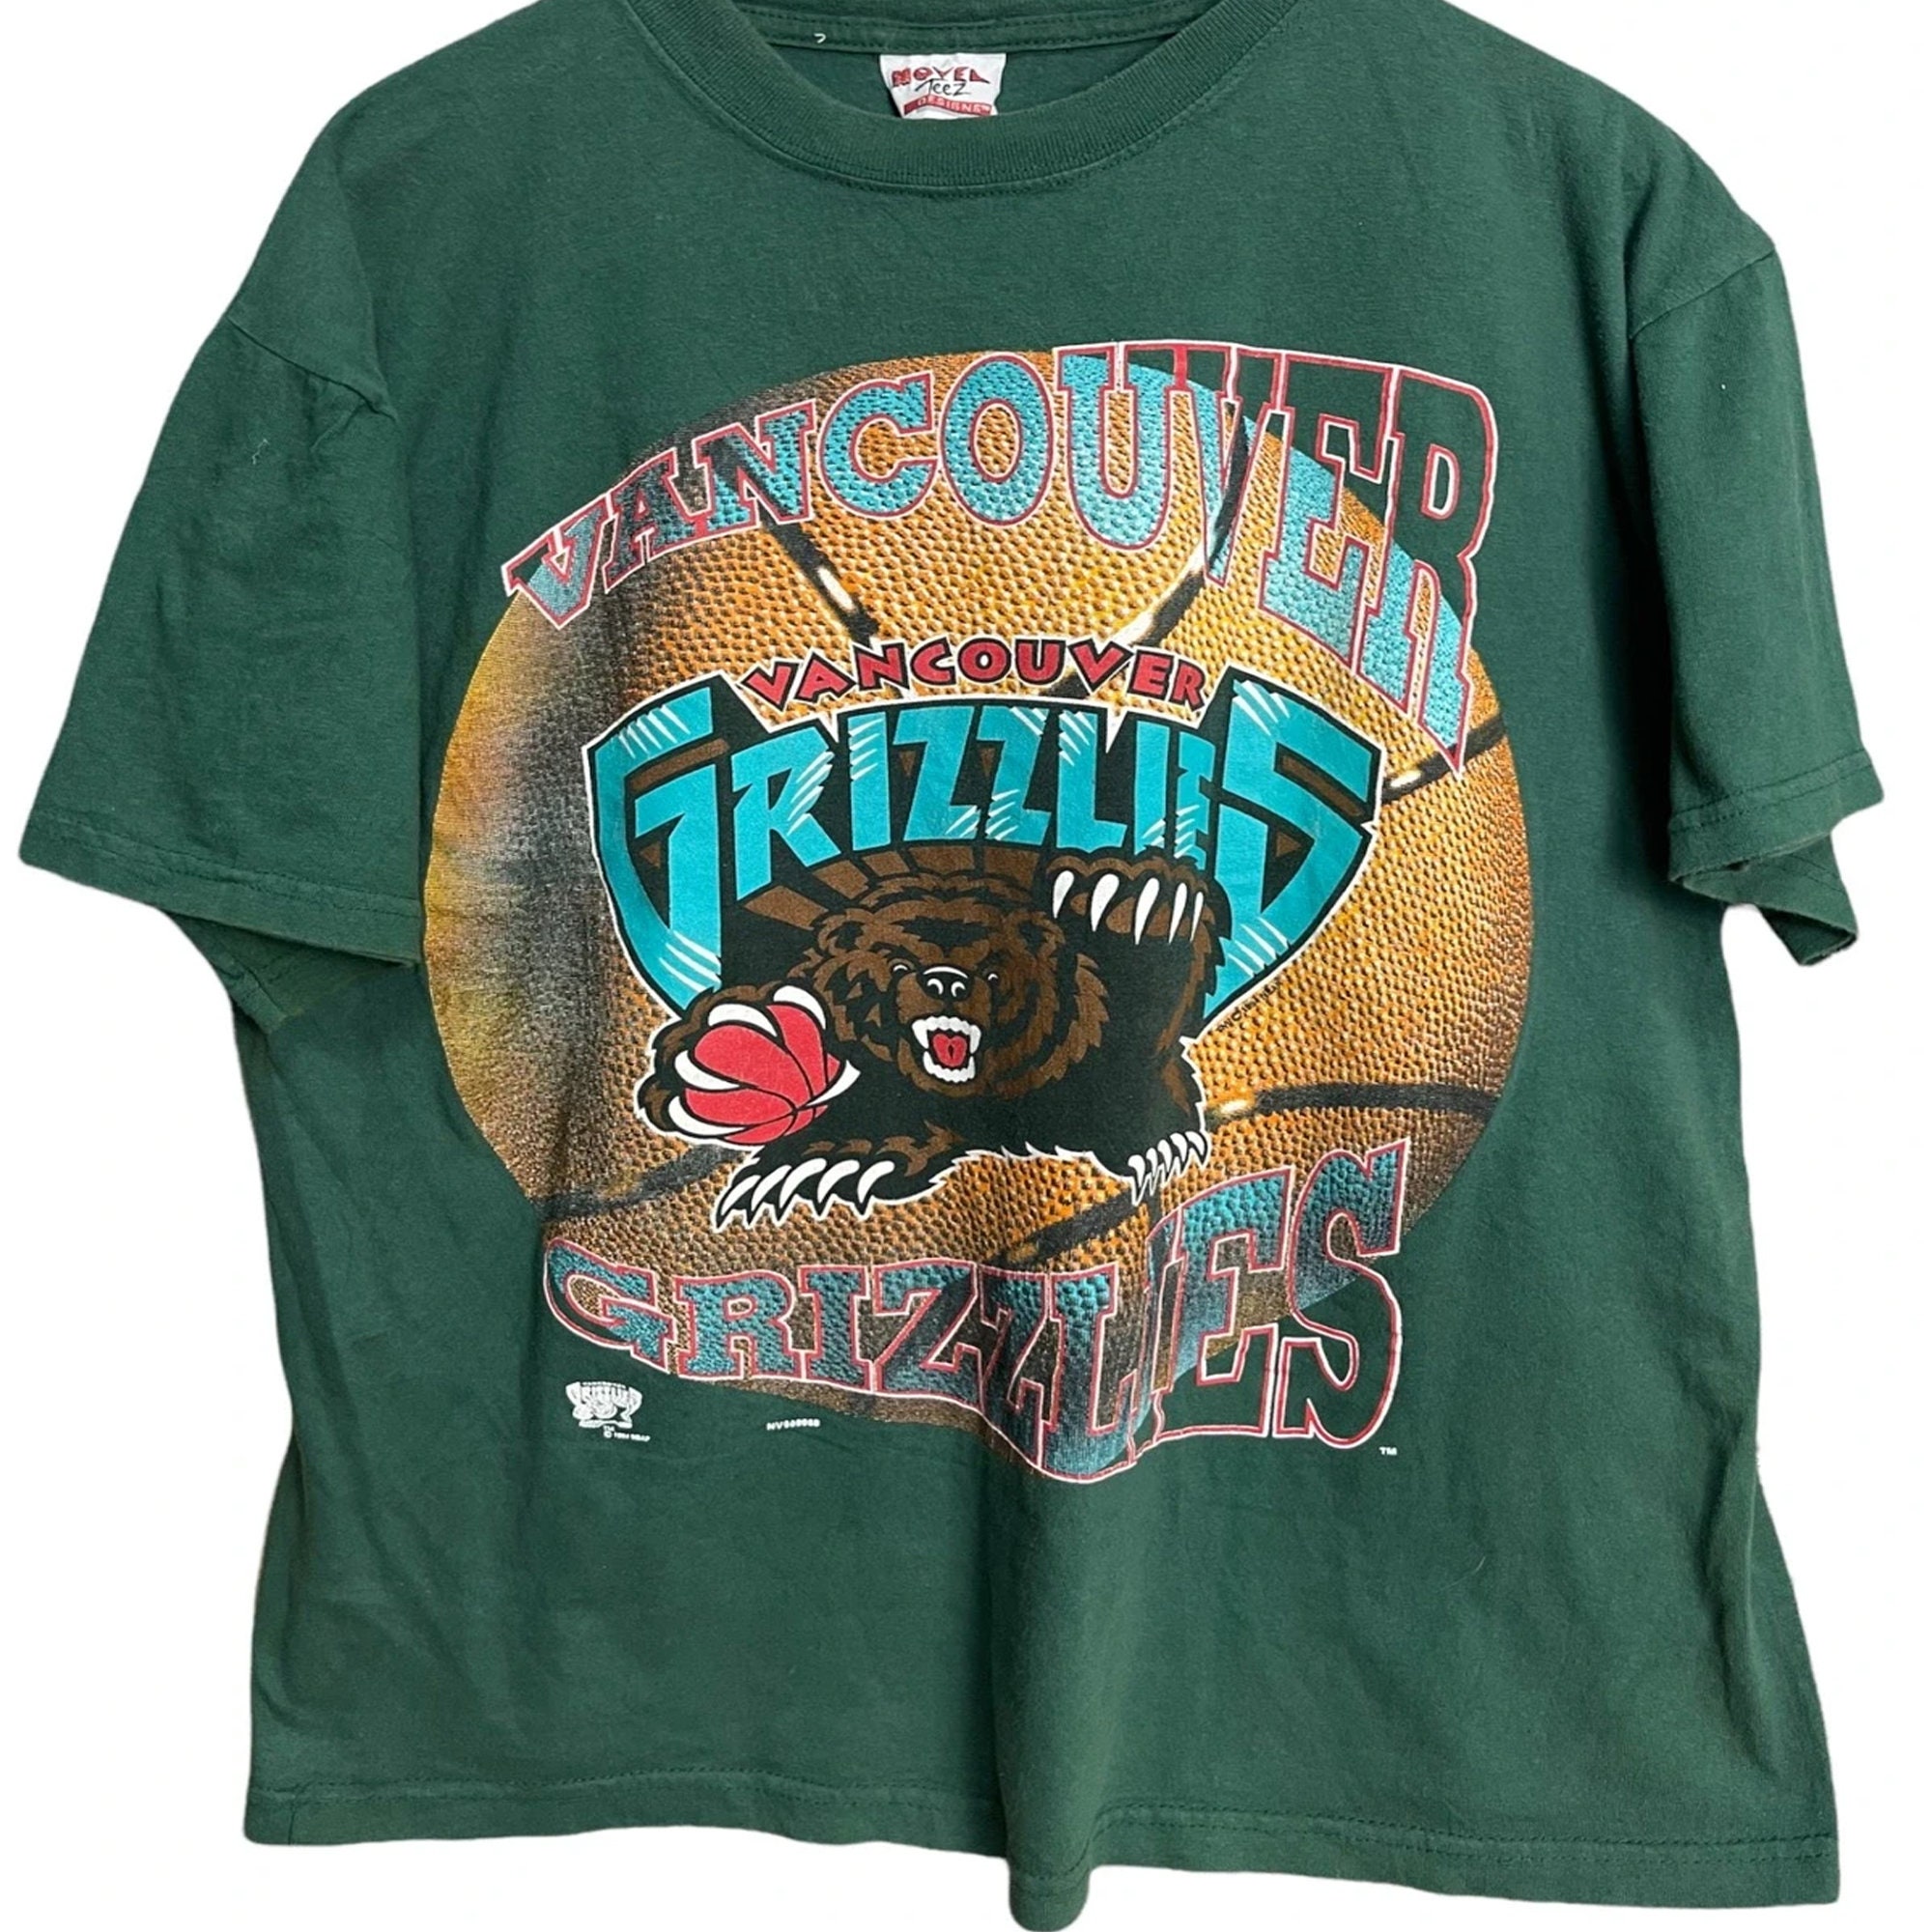 Hot! Retro Vintage Vancouver Grizzlies Shirt, NBA Basketball Graphic Tee, Vancouver Grizzlies Logo Unisex Softstyle T-Shirt